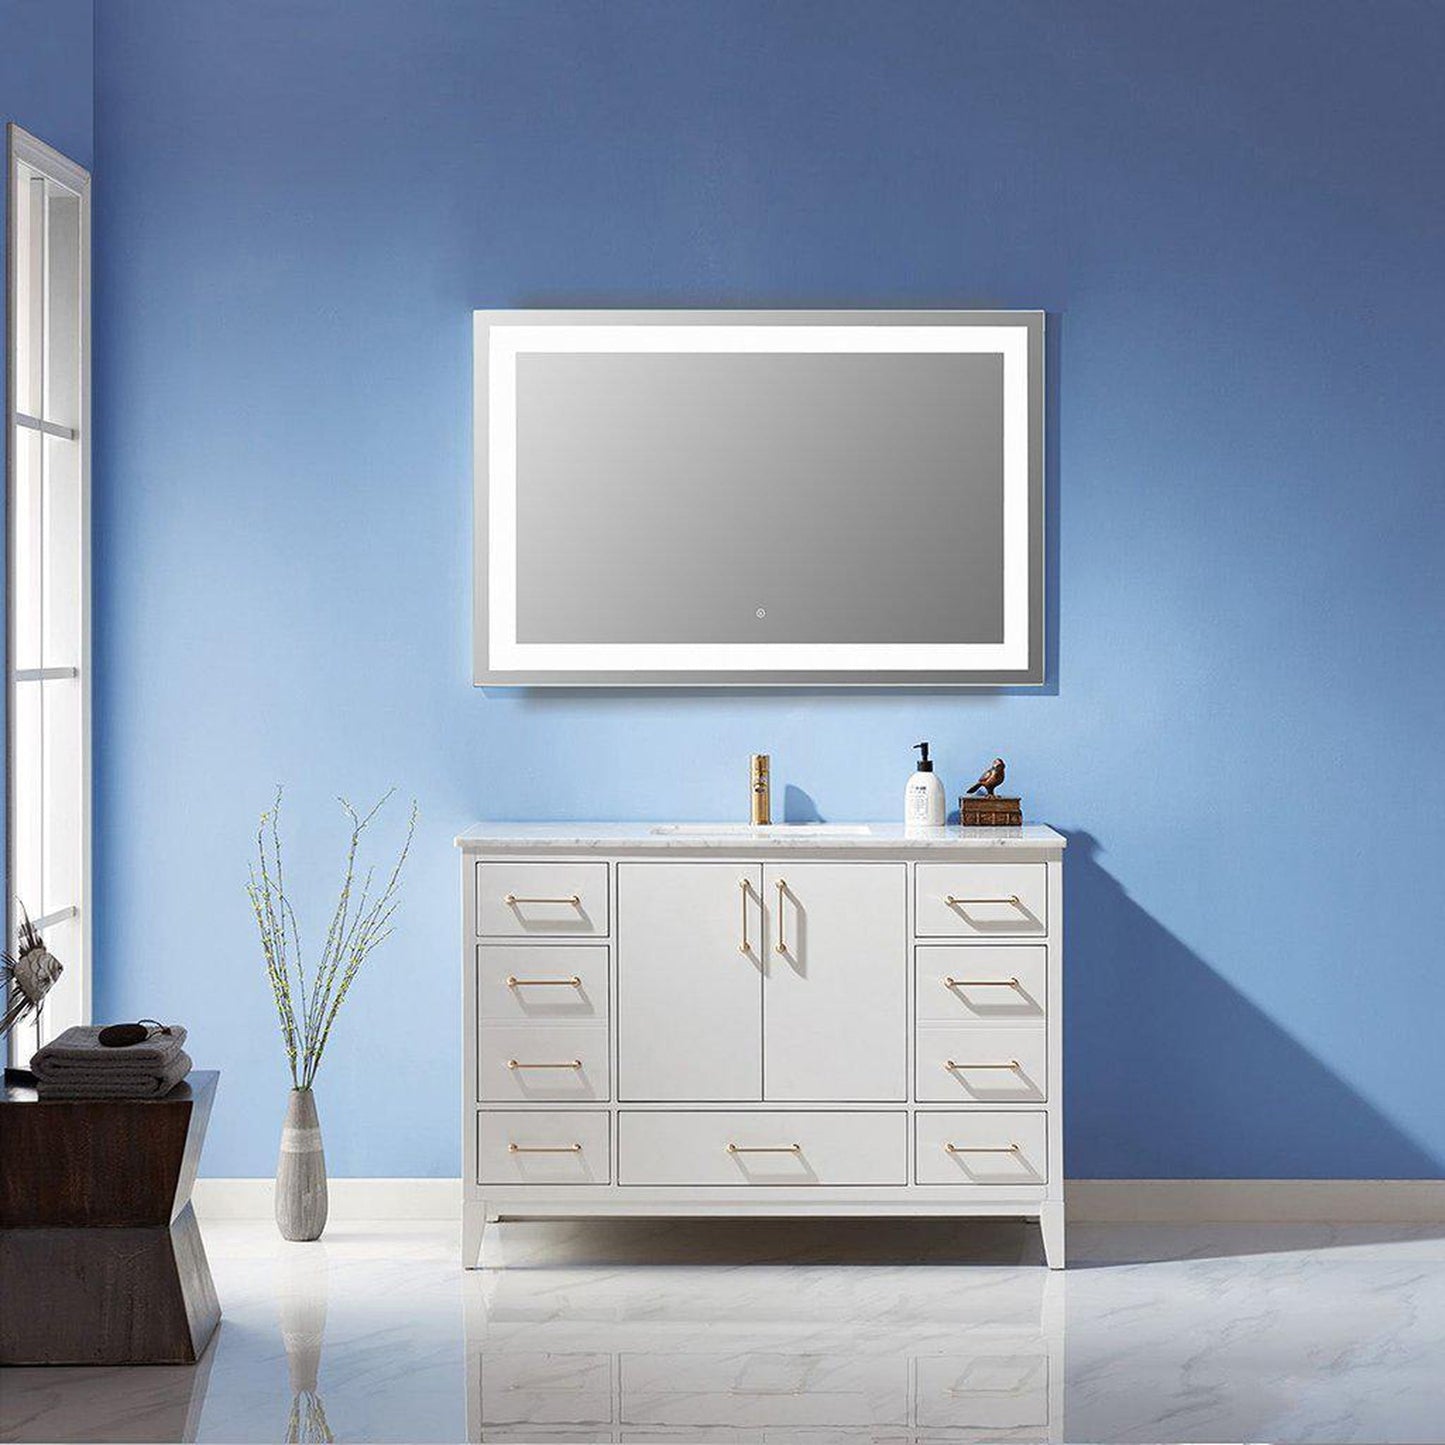 Altair Genova 48" Rectangle Wall-Mounted LED Mirror